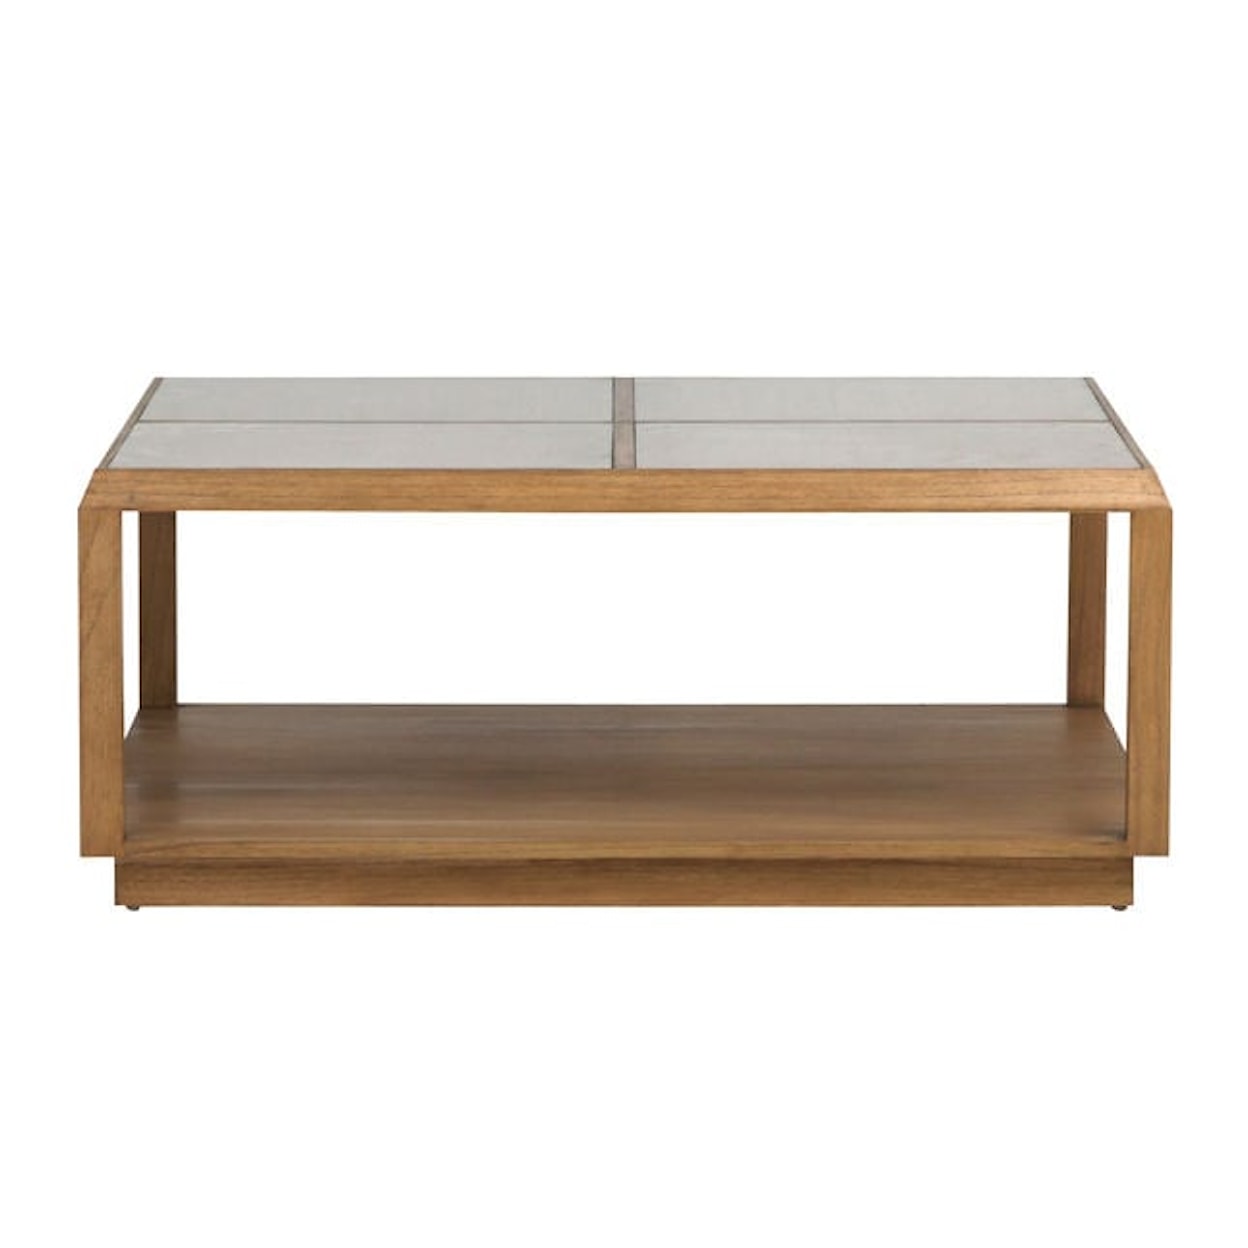 Dovetail Furniture Coffee Tables TALLULAH COFFEE TABLE